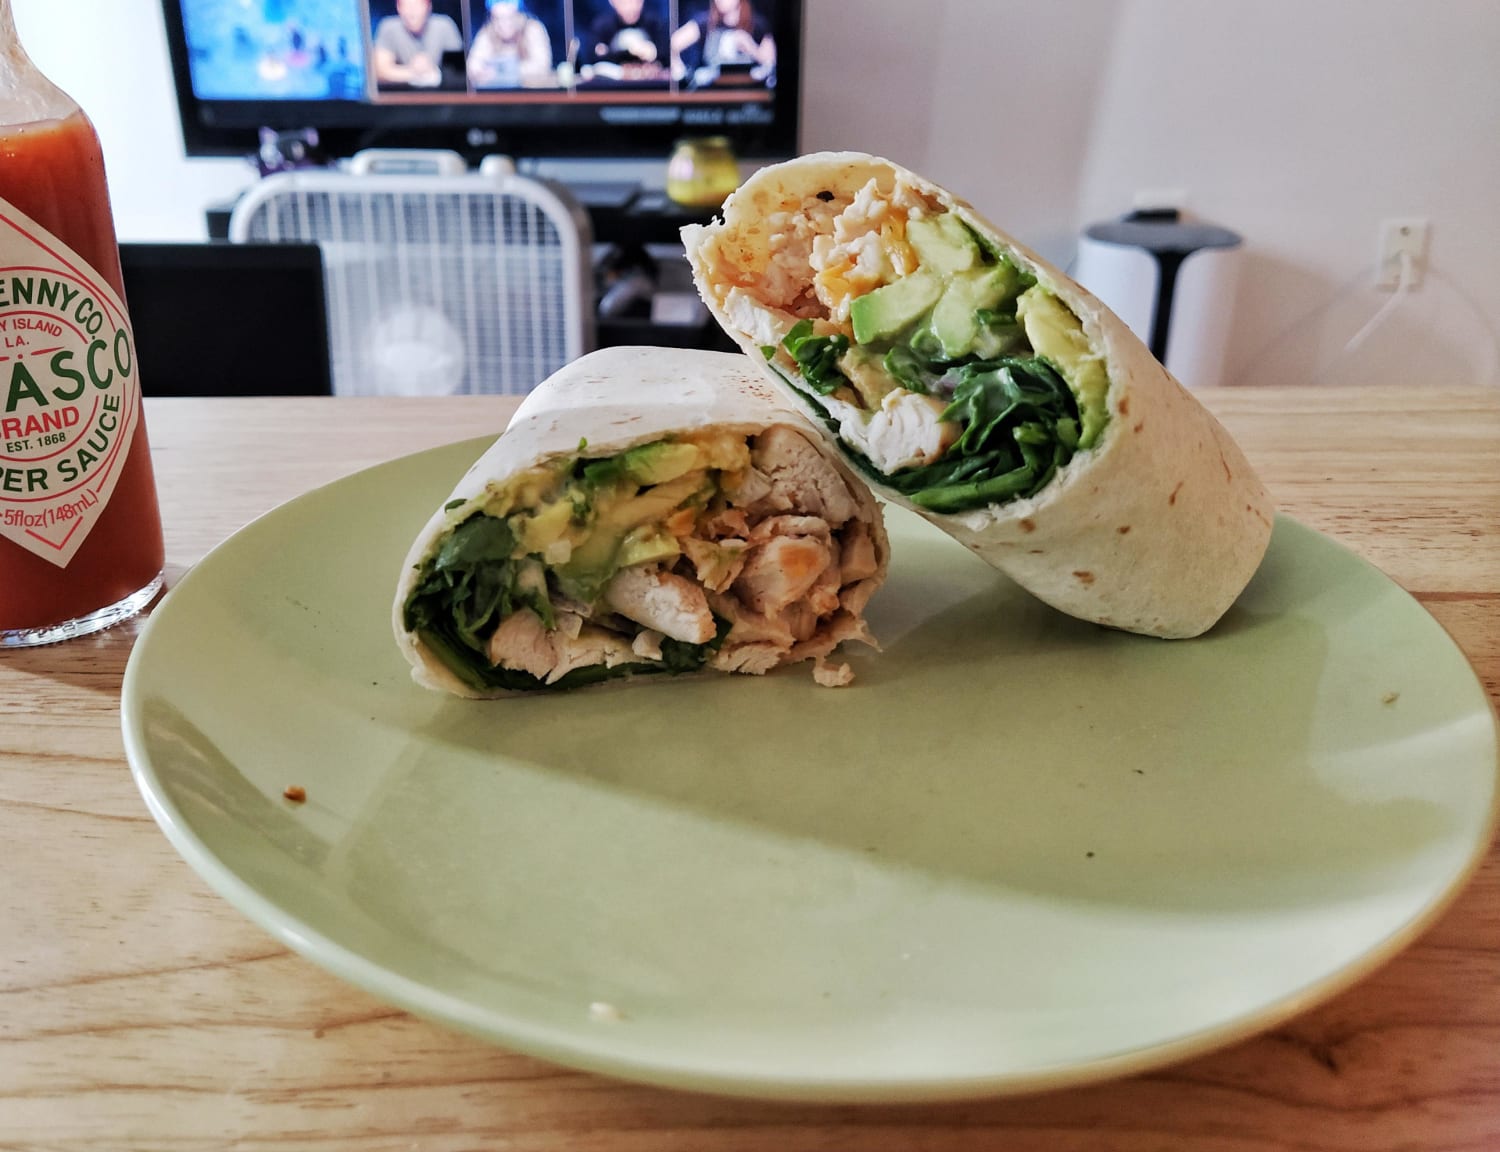 Chicken, cheddar, avocado, onion and spinach wrap with ranch